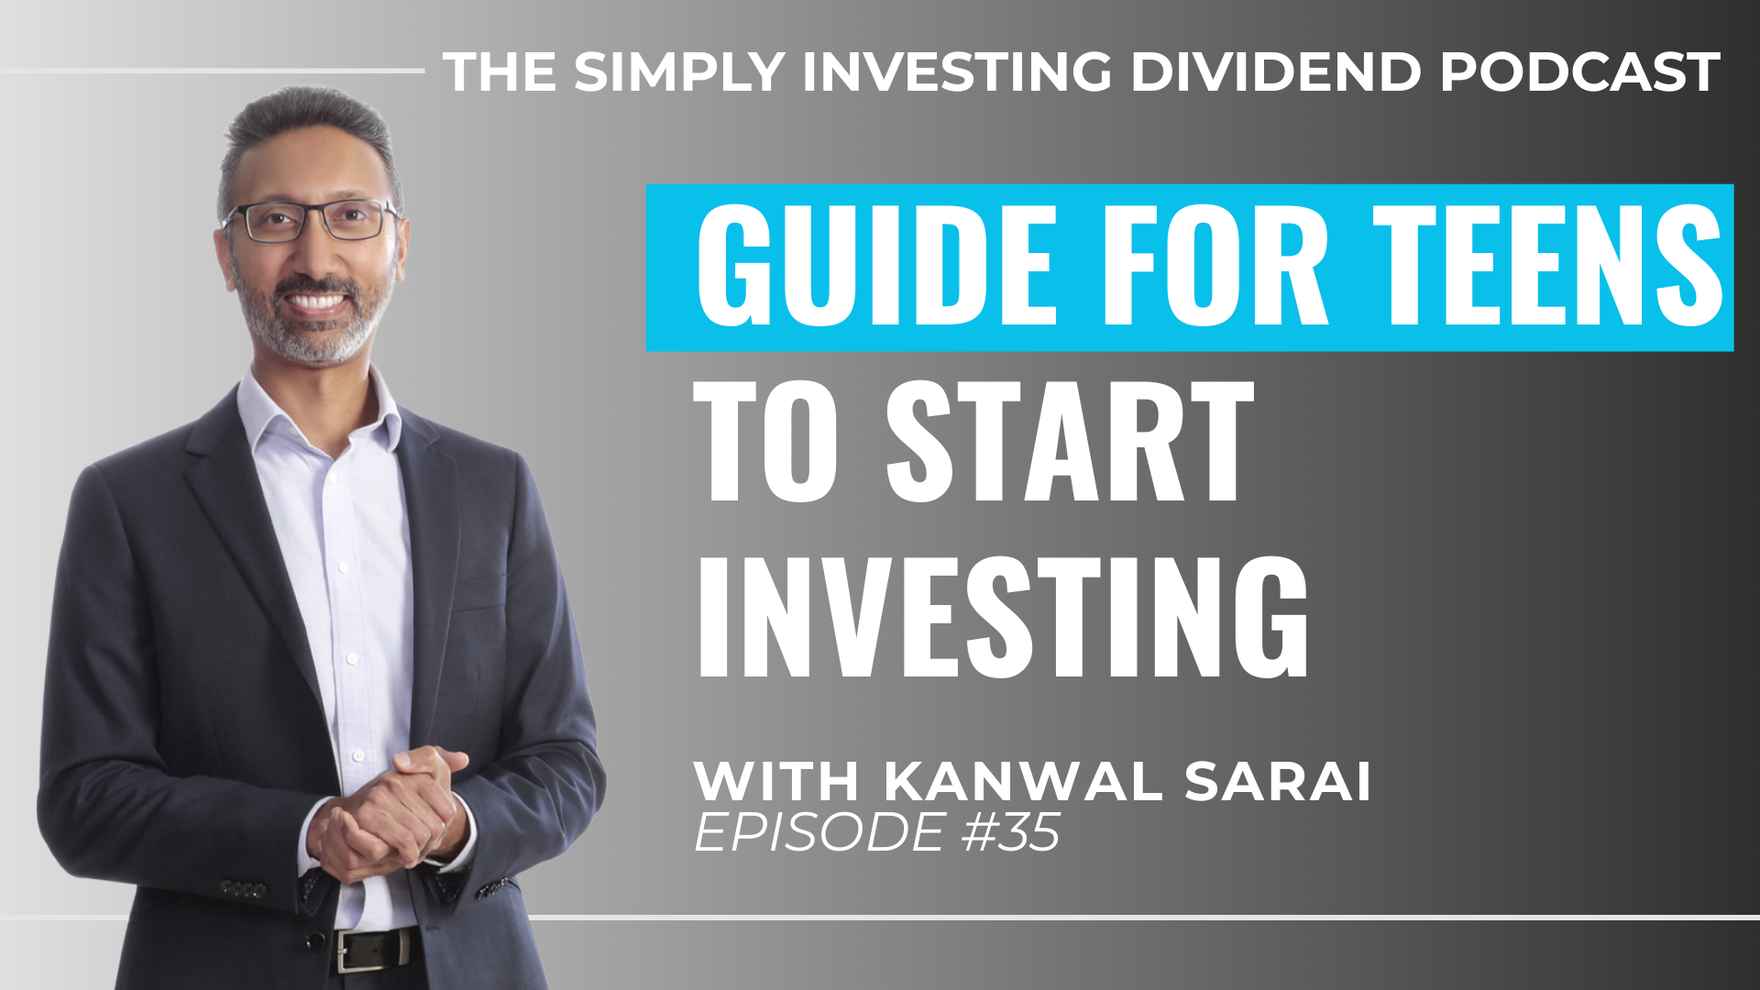 Simply Investing Dividend Podcast Episode 35 - Guide for Teens to Start Investing